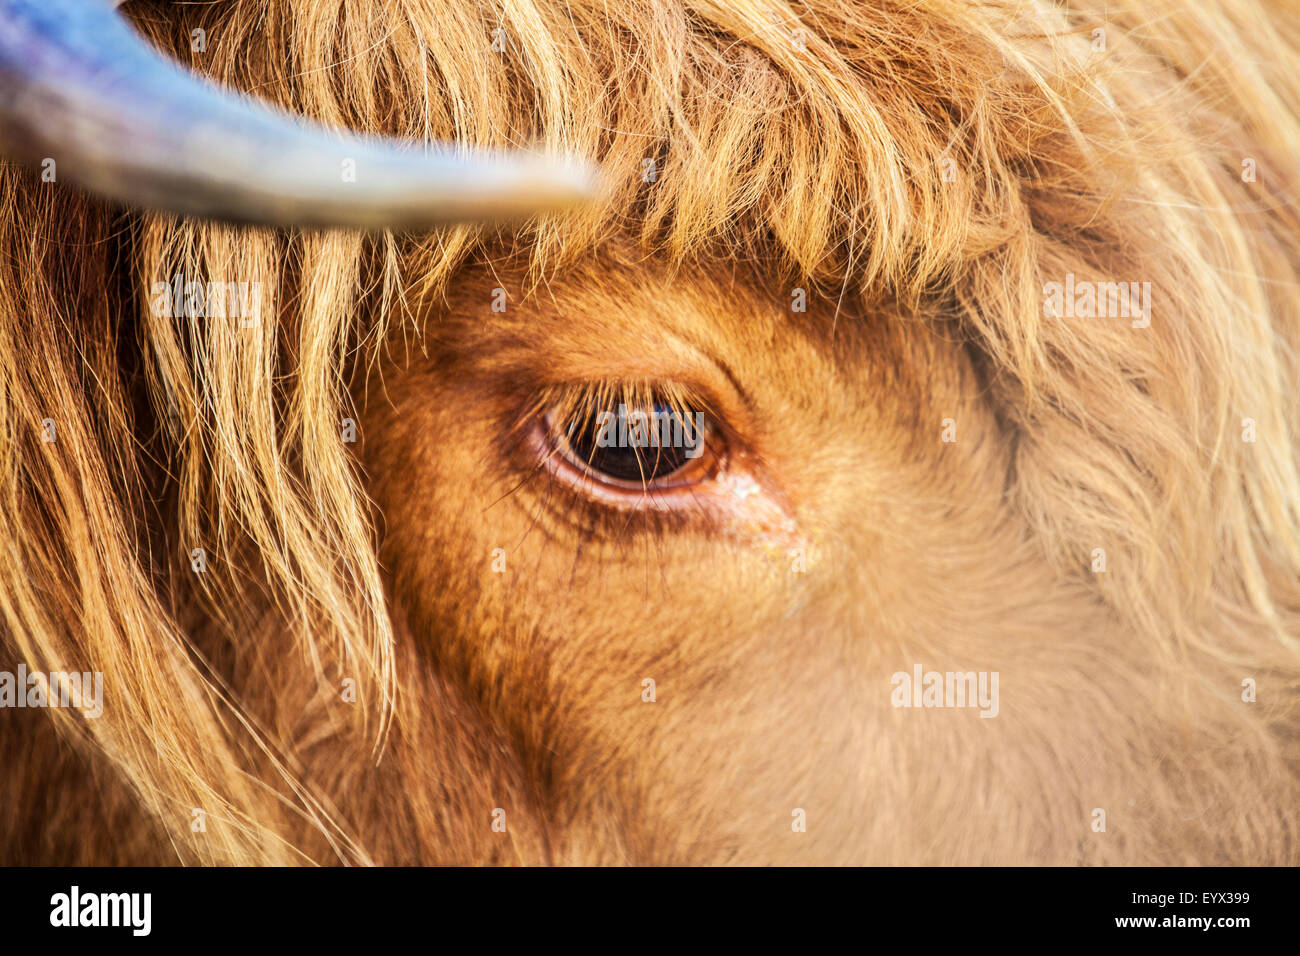 Close up of the head of a Highland cow, Bos taurus. Stock Photo